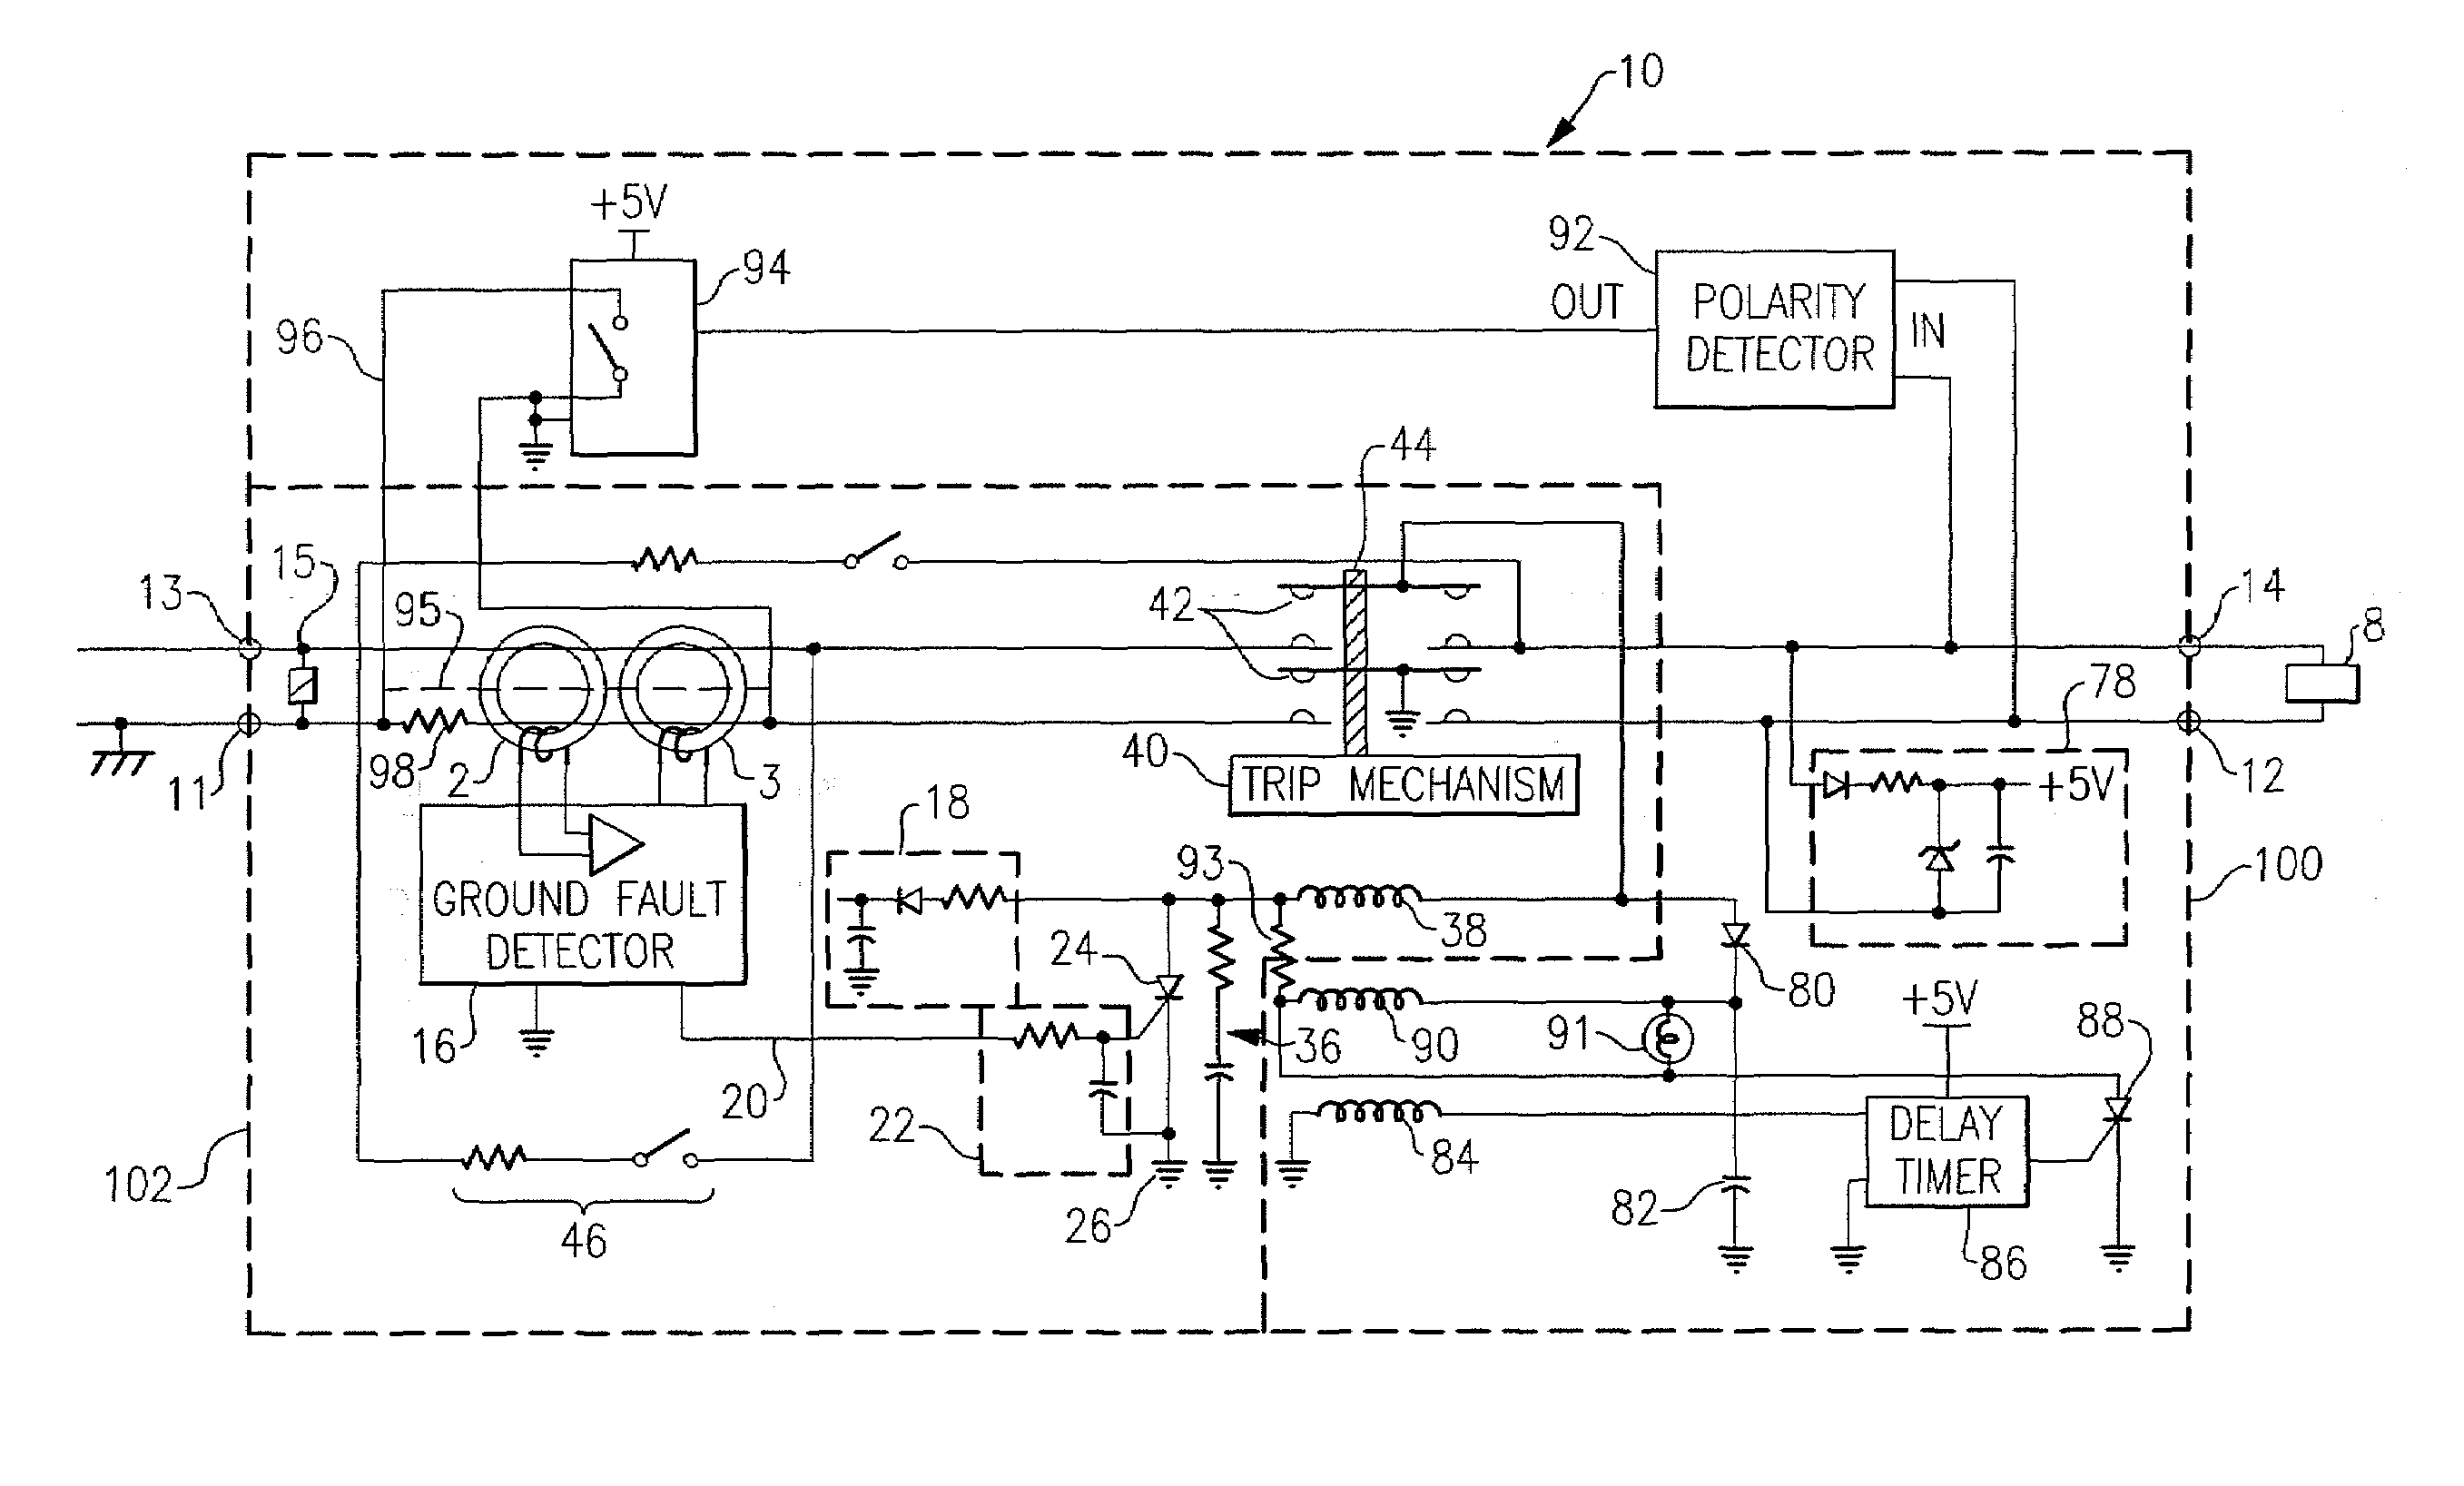 Circuit protection device with grounded neutral half cycle self test